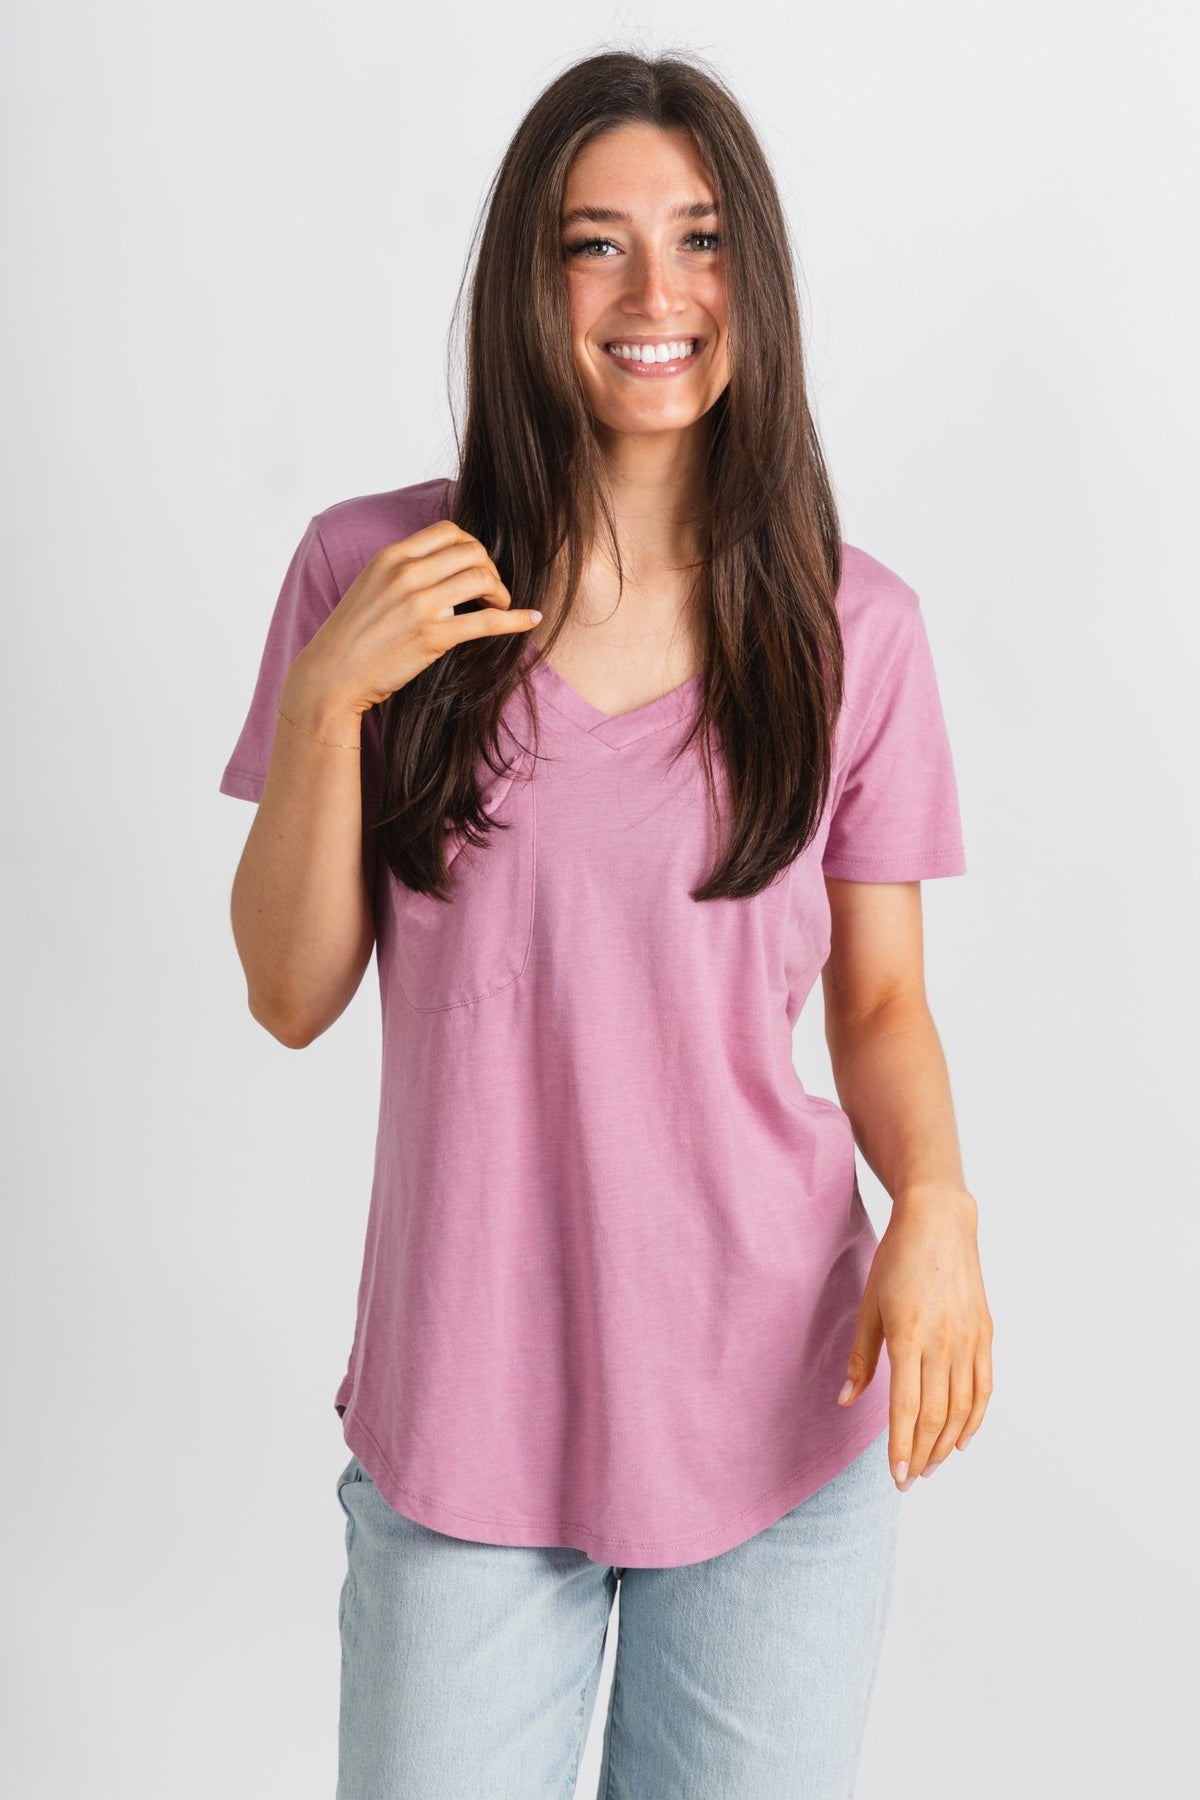 Z Supply pocket tee dusty orchid - Z Supply Top - Z Supply Tops, Dresses, Tanks, Tees, Cardigans, Joggers and Loungewear at Lush Fashion Lounge